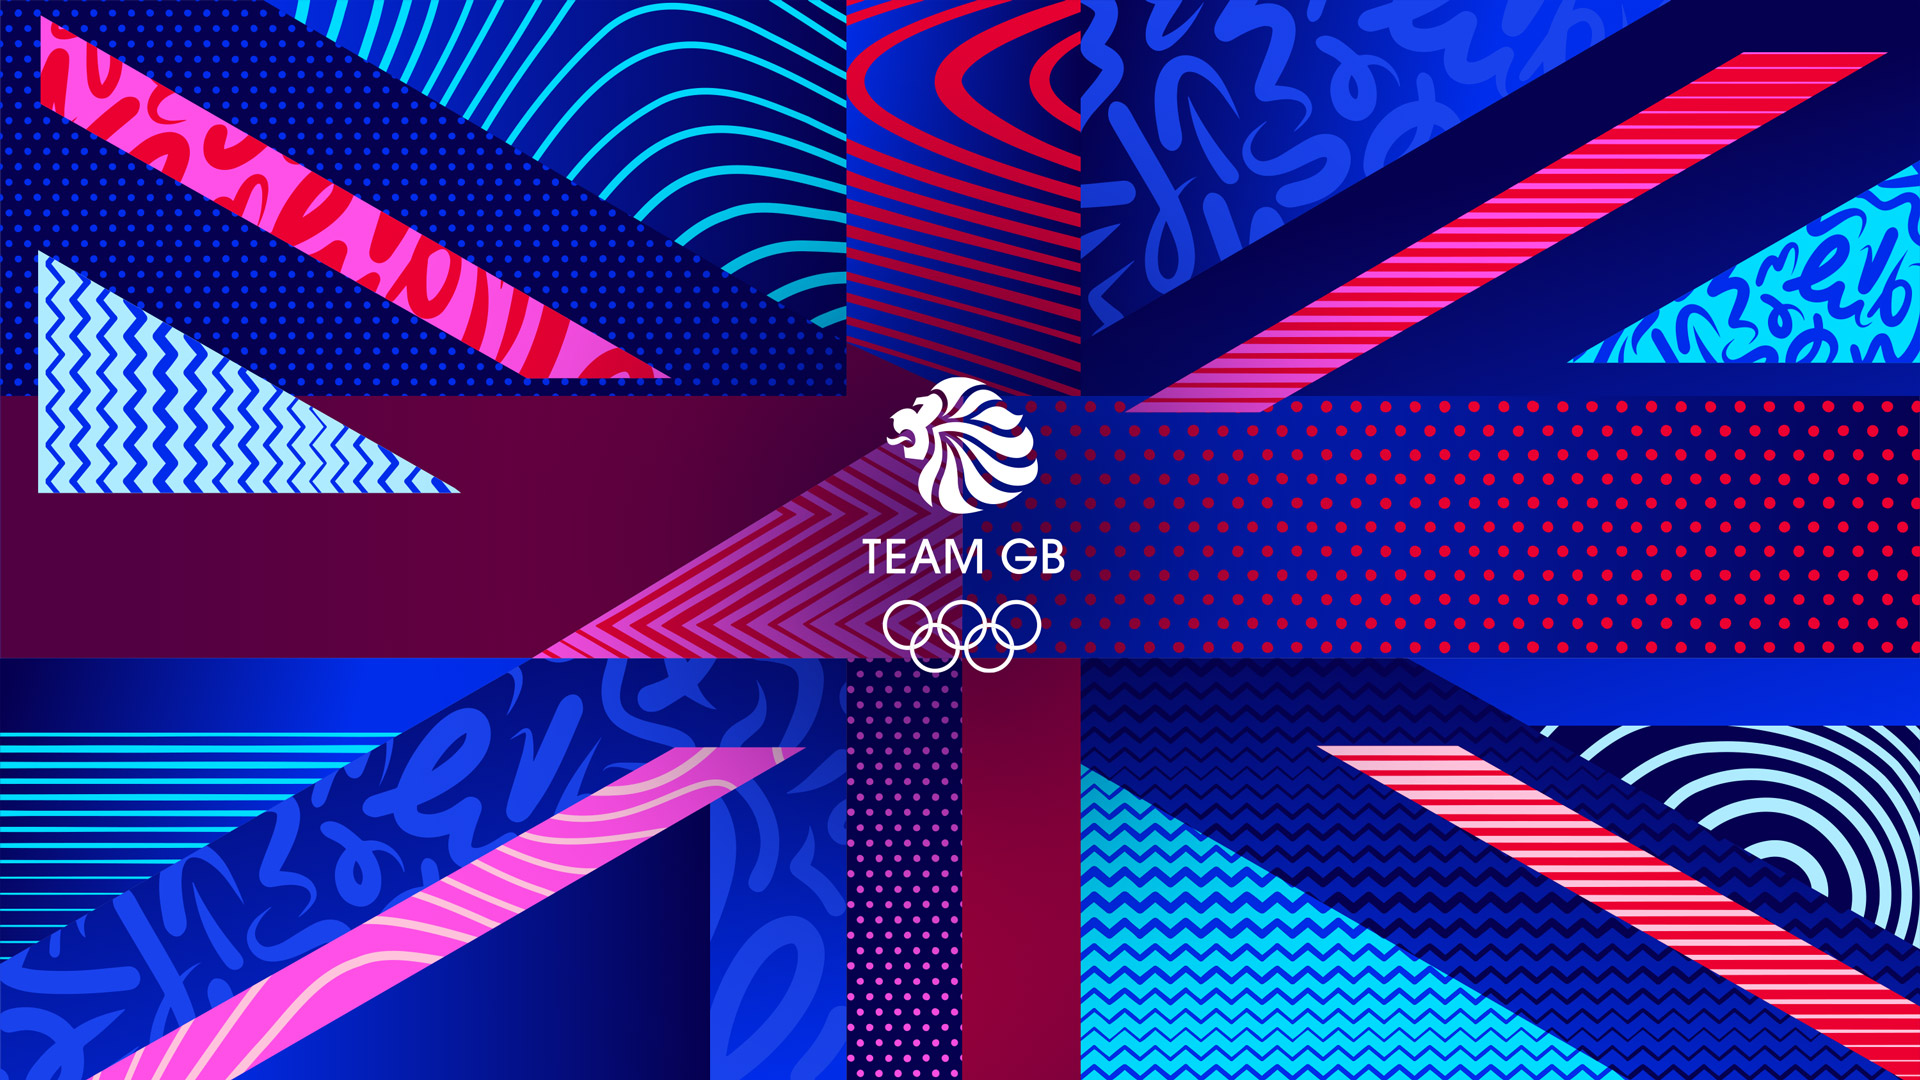 Thisaway Get the Team Gb Brand Ready for the Paris 2024 Olympics